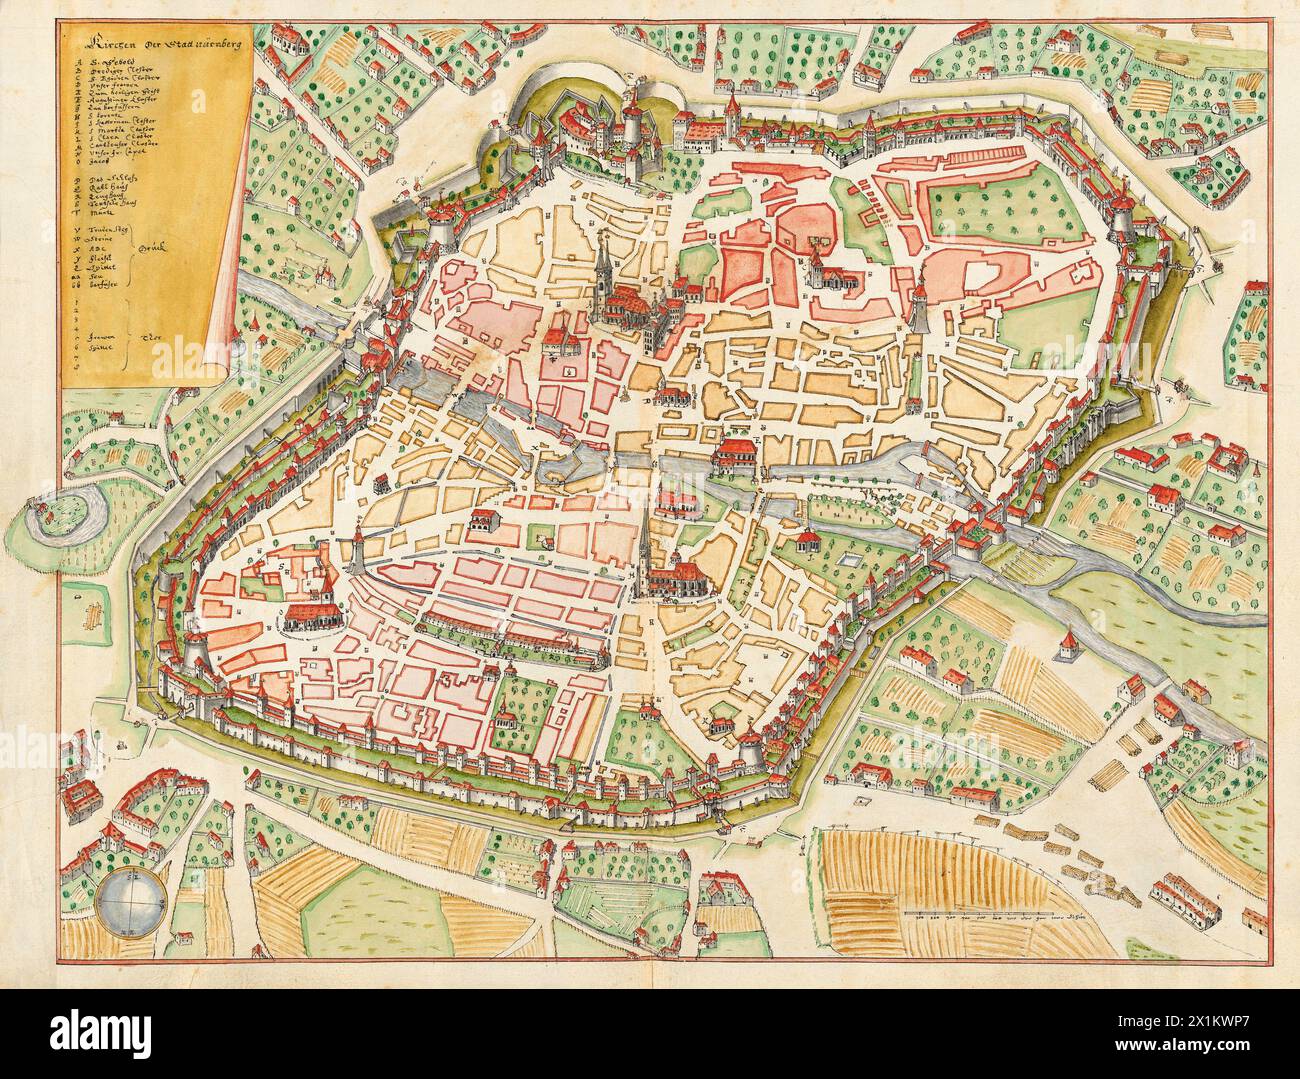 Vintage Nuremberg, Germany map of city and State Churches. by Johannes Ardüser, Manuscript map: multicolored, ink and watercolor, 1650s.   Source: Zentralbibliothek Zürich, Stock Photo